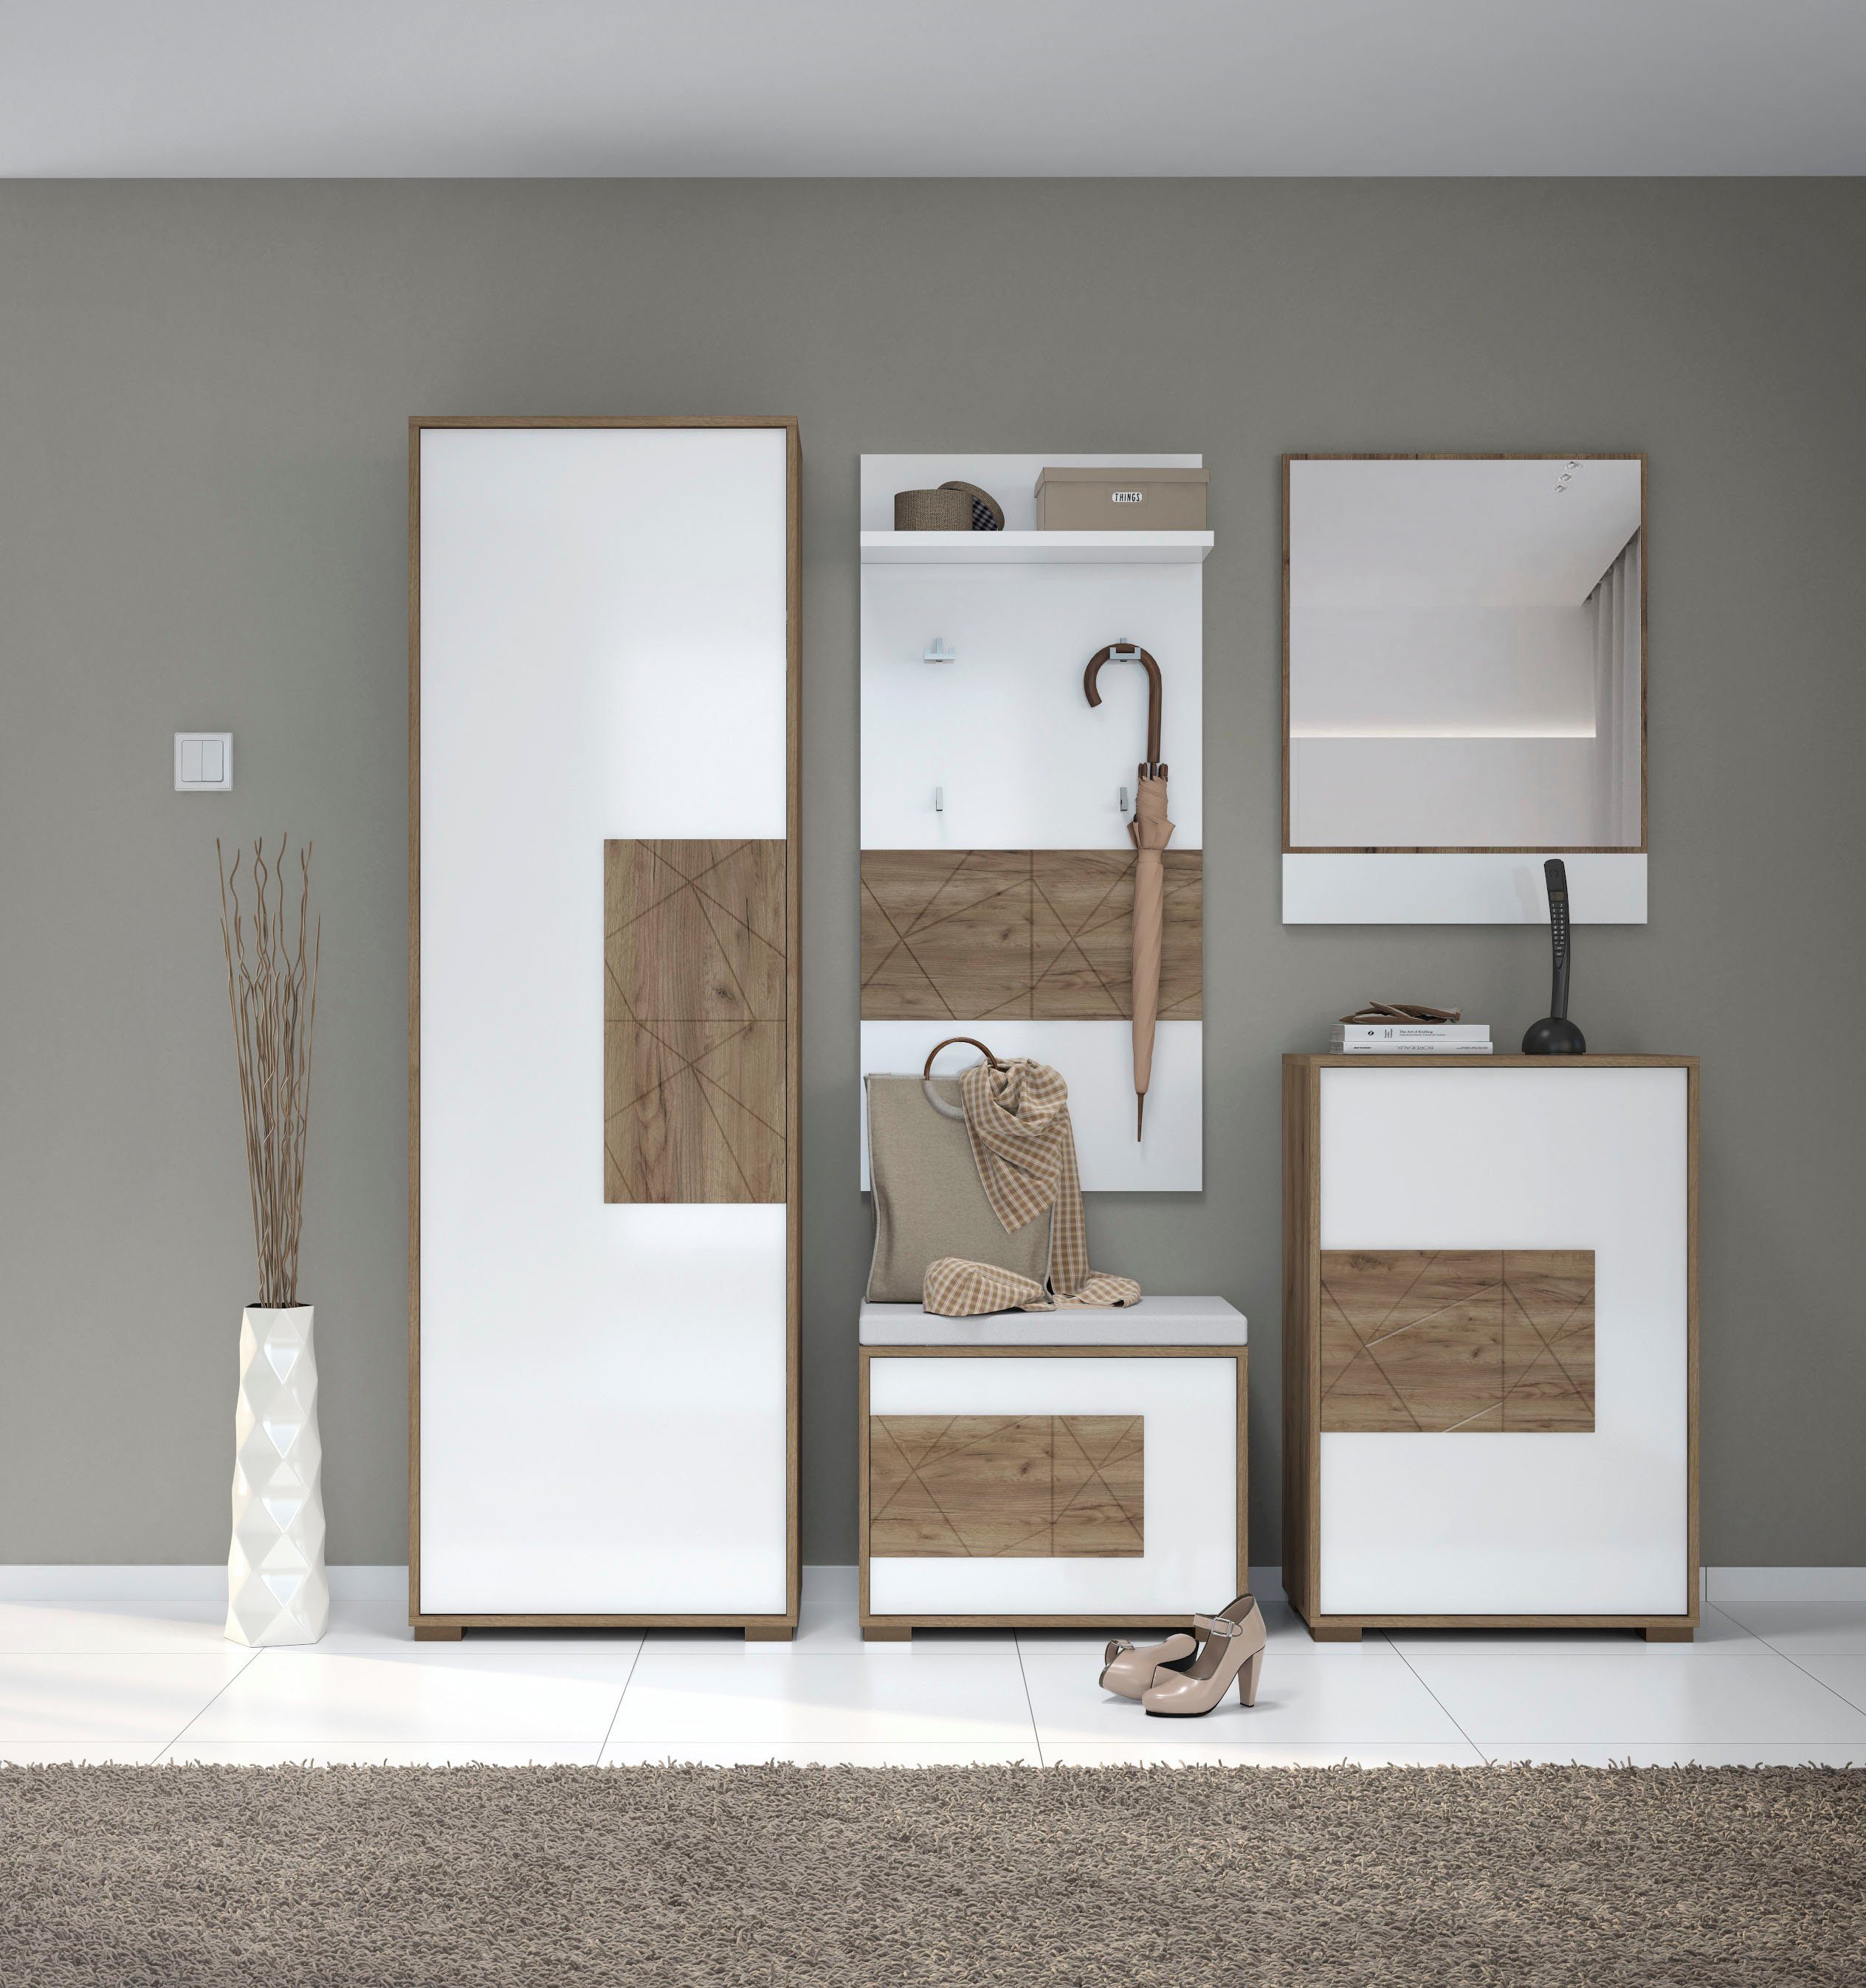 Garderobenschrank of Stela Push-to-open-Funktion Places Style mit